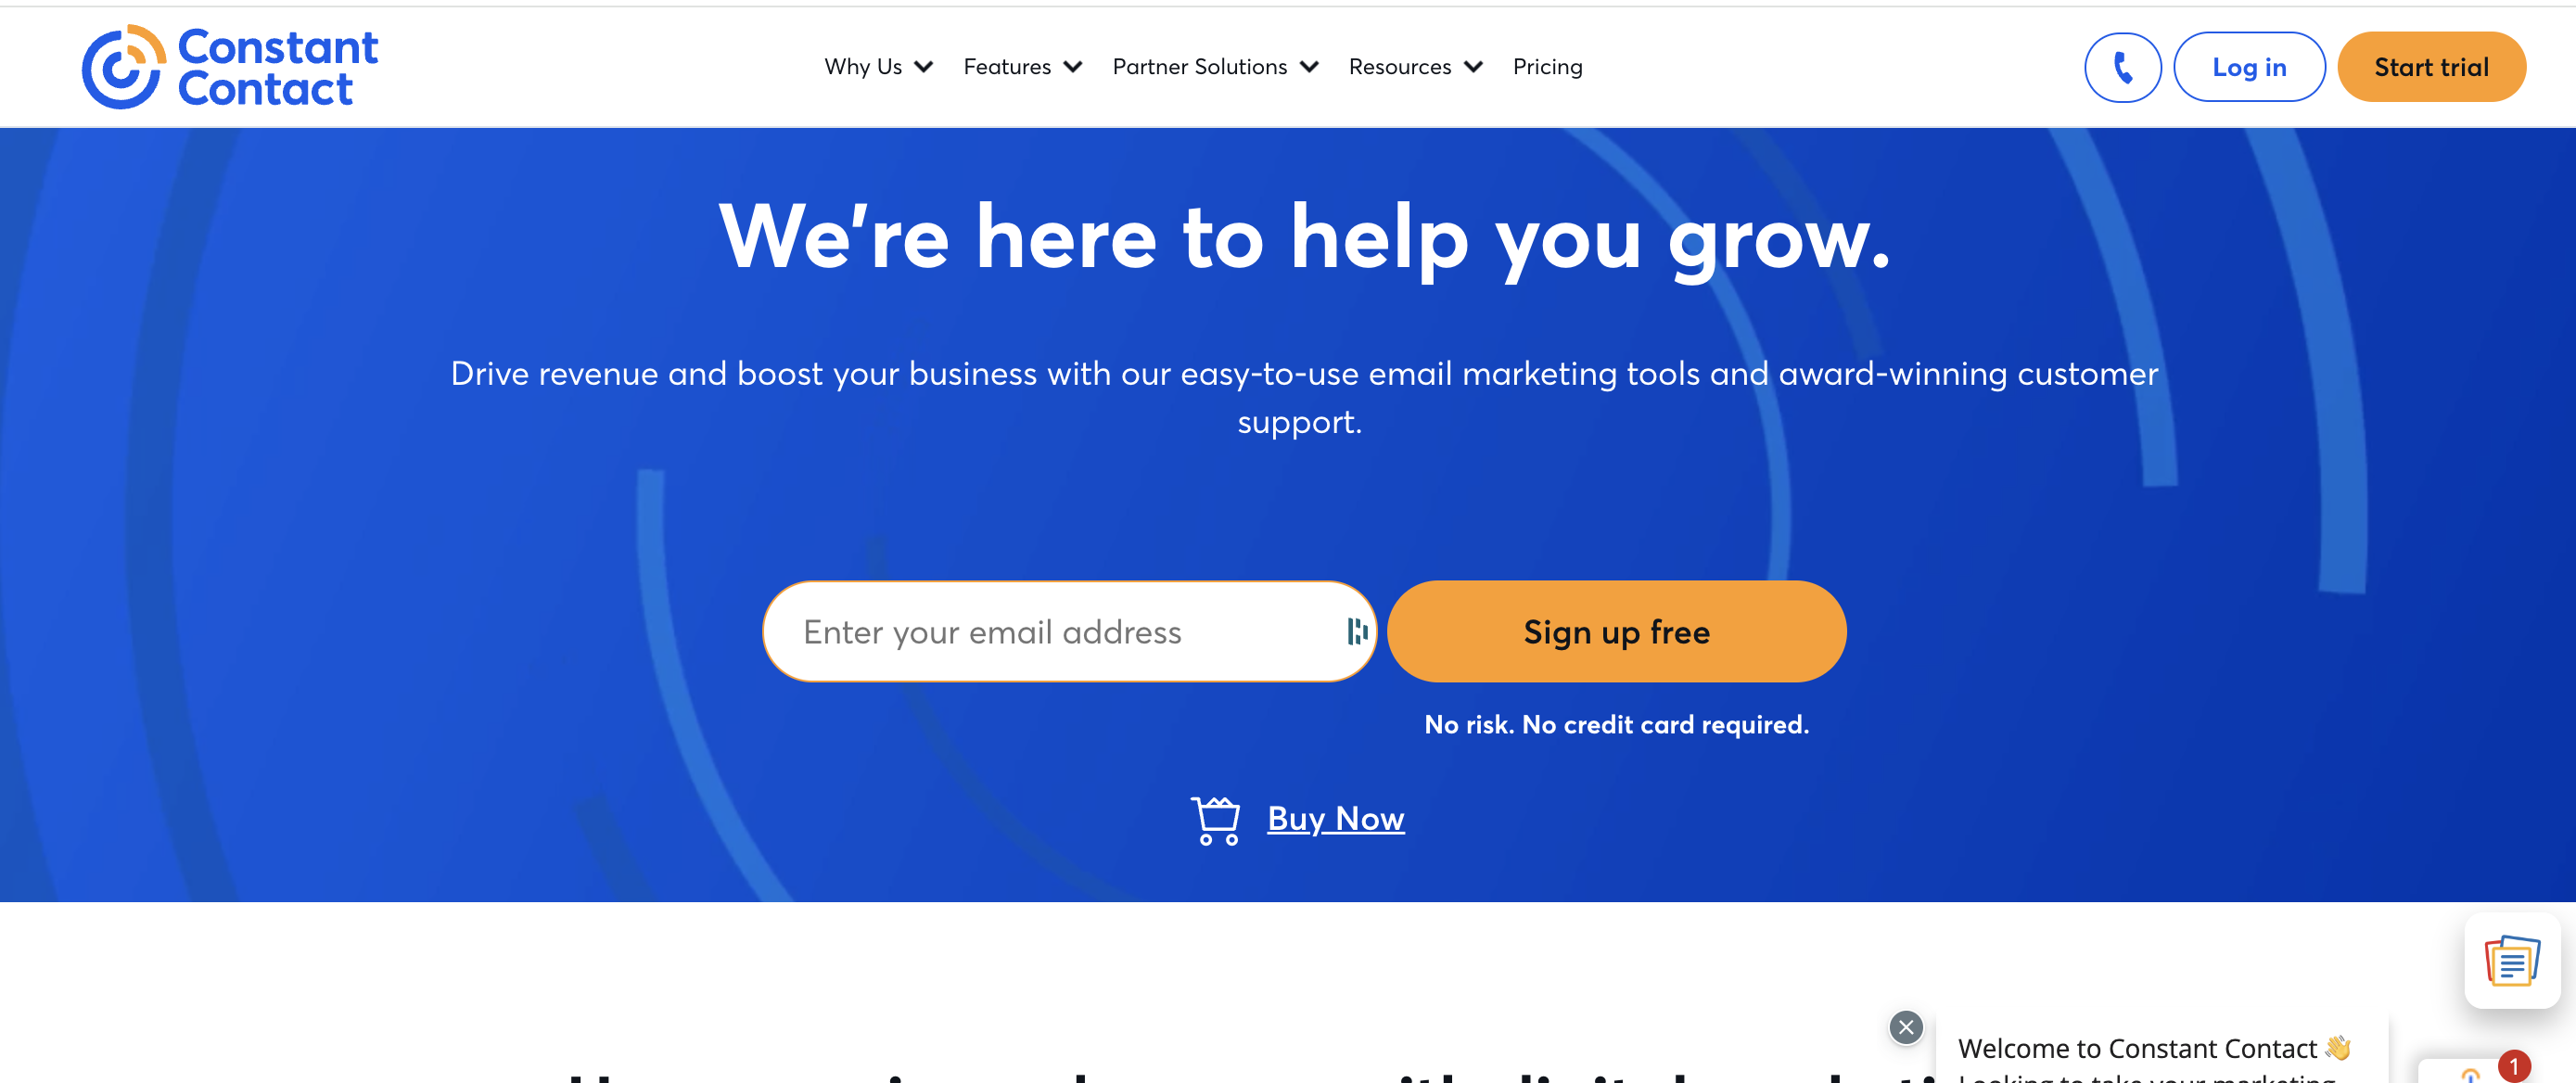 constant contact - home page - small business email marketing tools